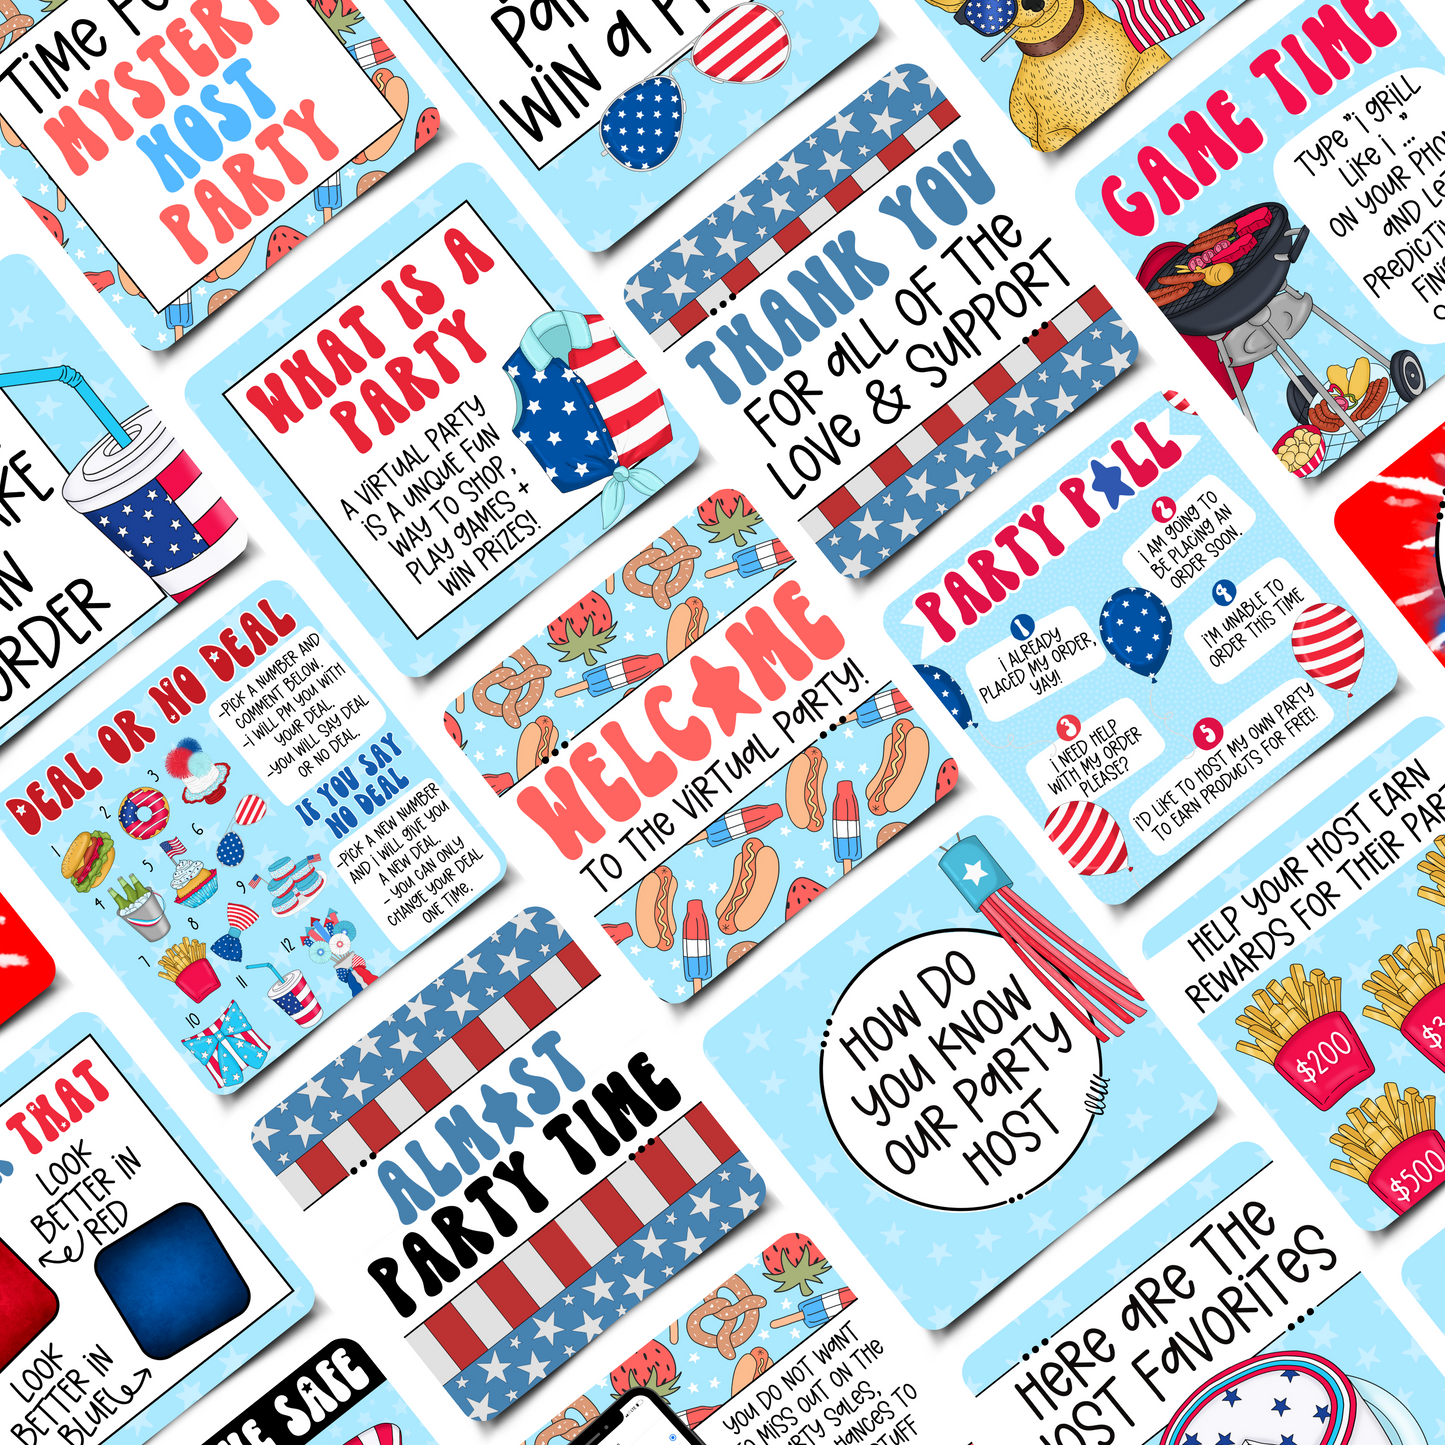 Red, White & Blue Mega Party Kit Graphics Collection